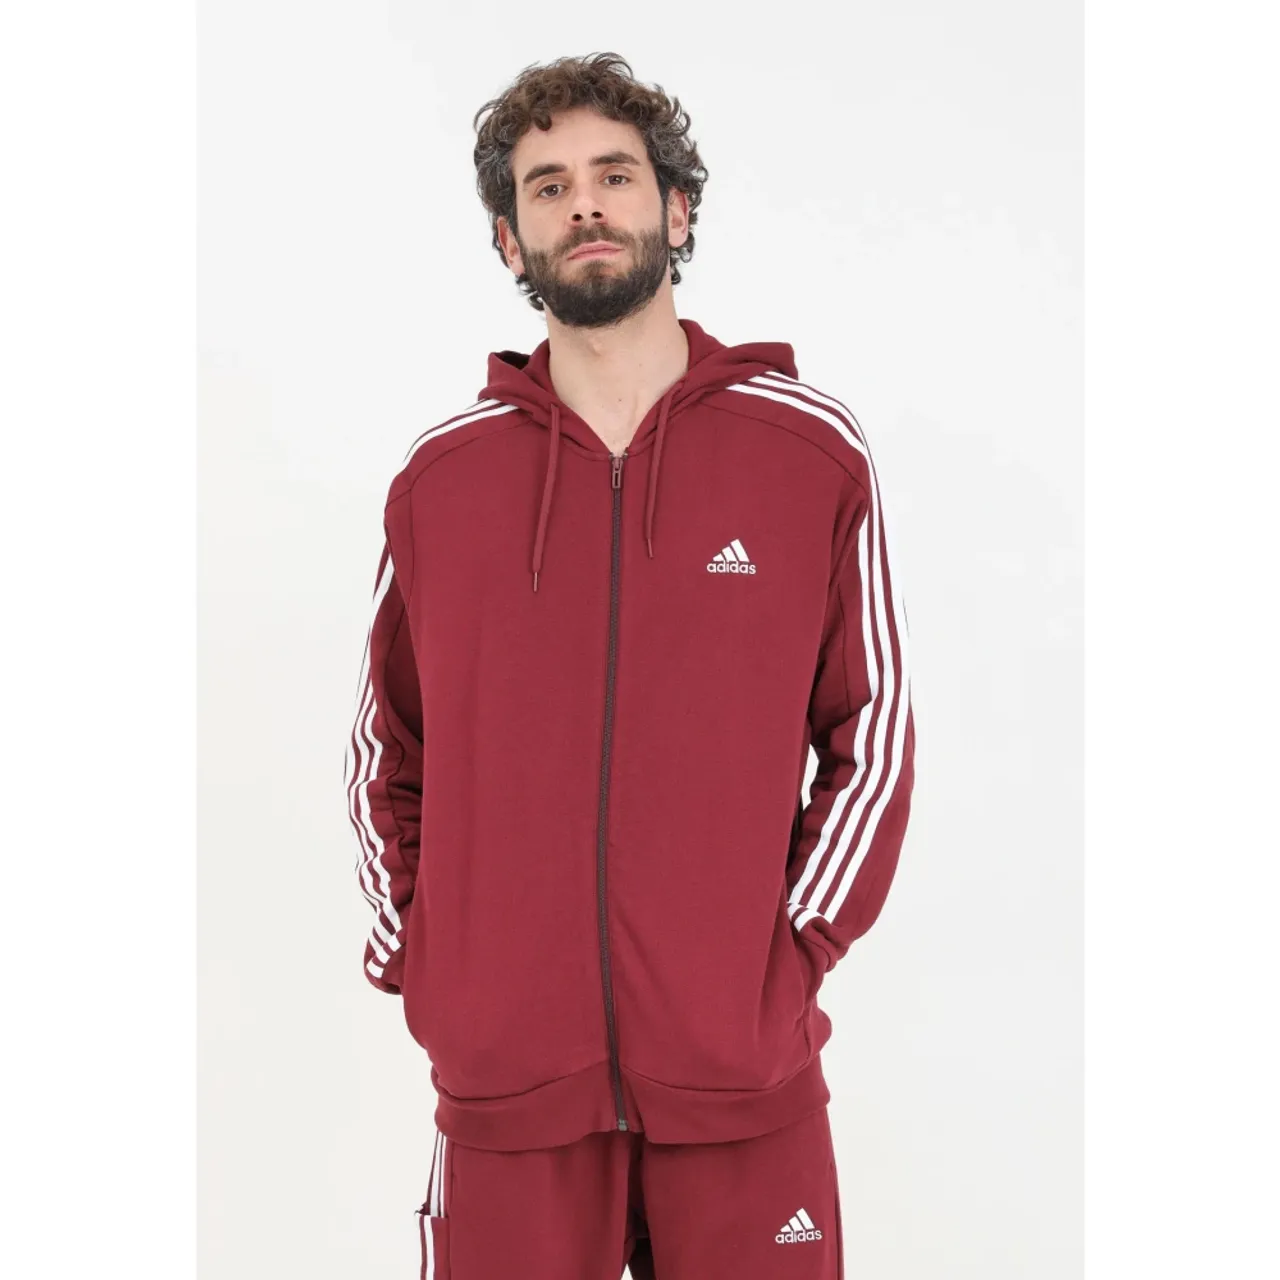 Essentials French Terry Hoodie Rot/Weiß Adidas